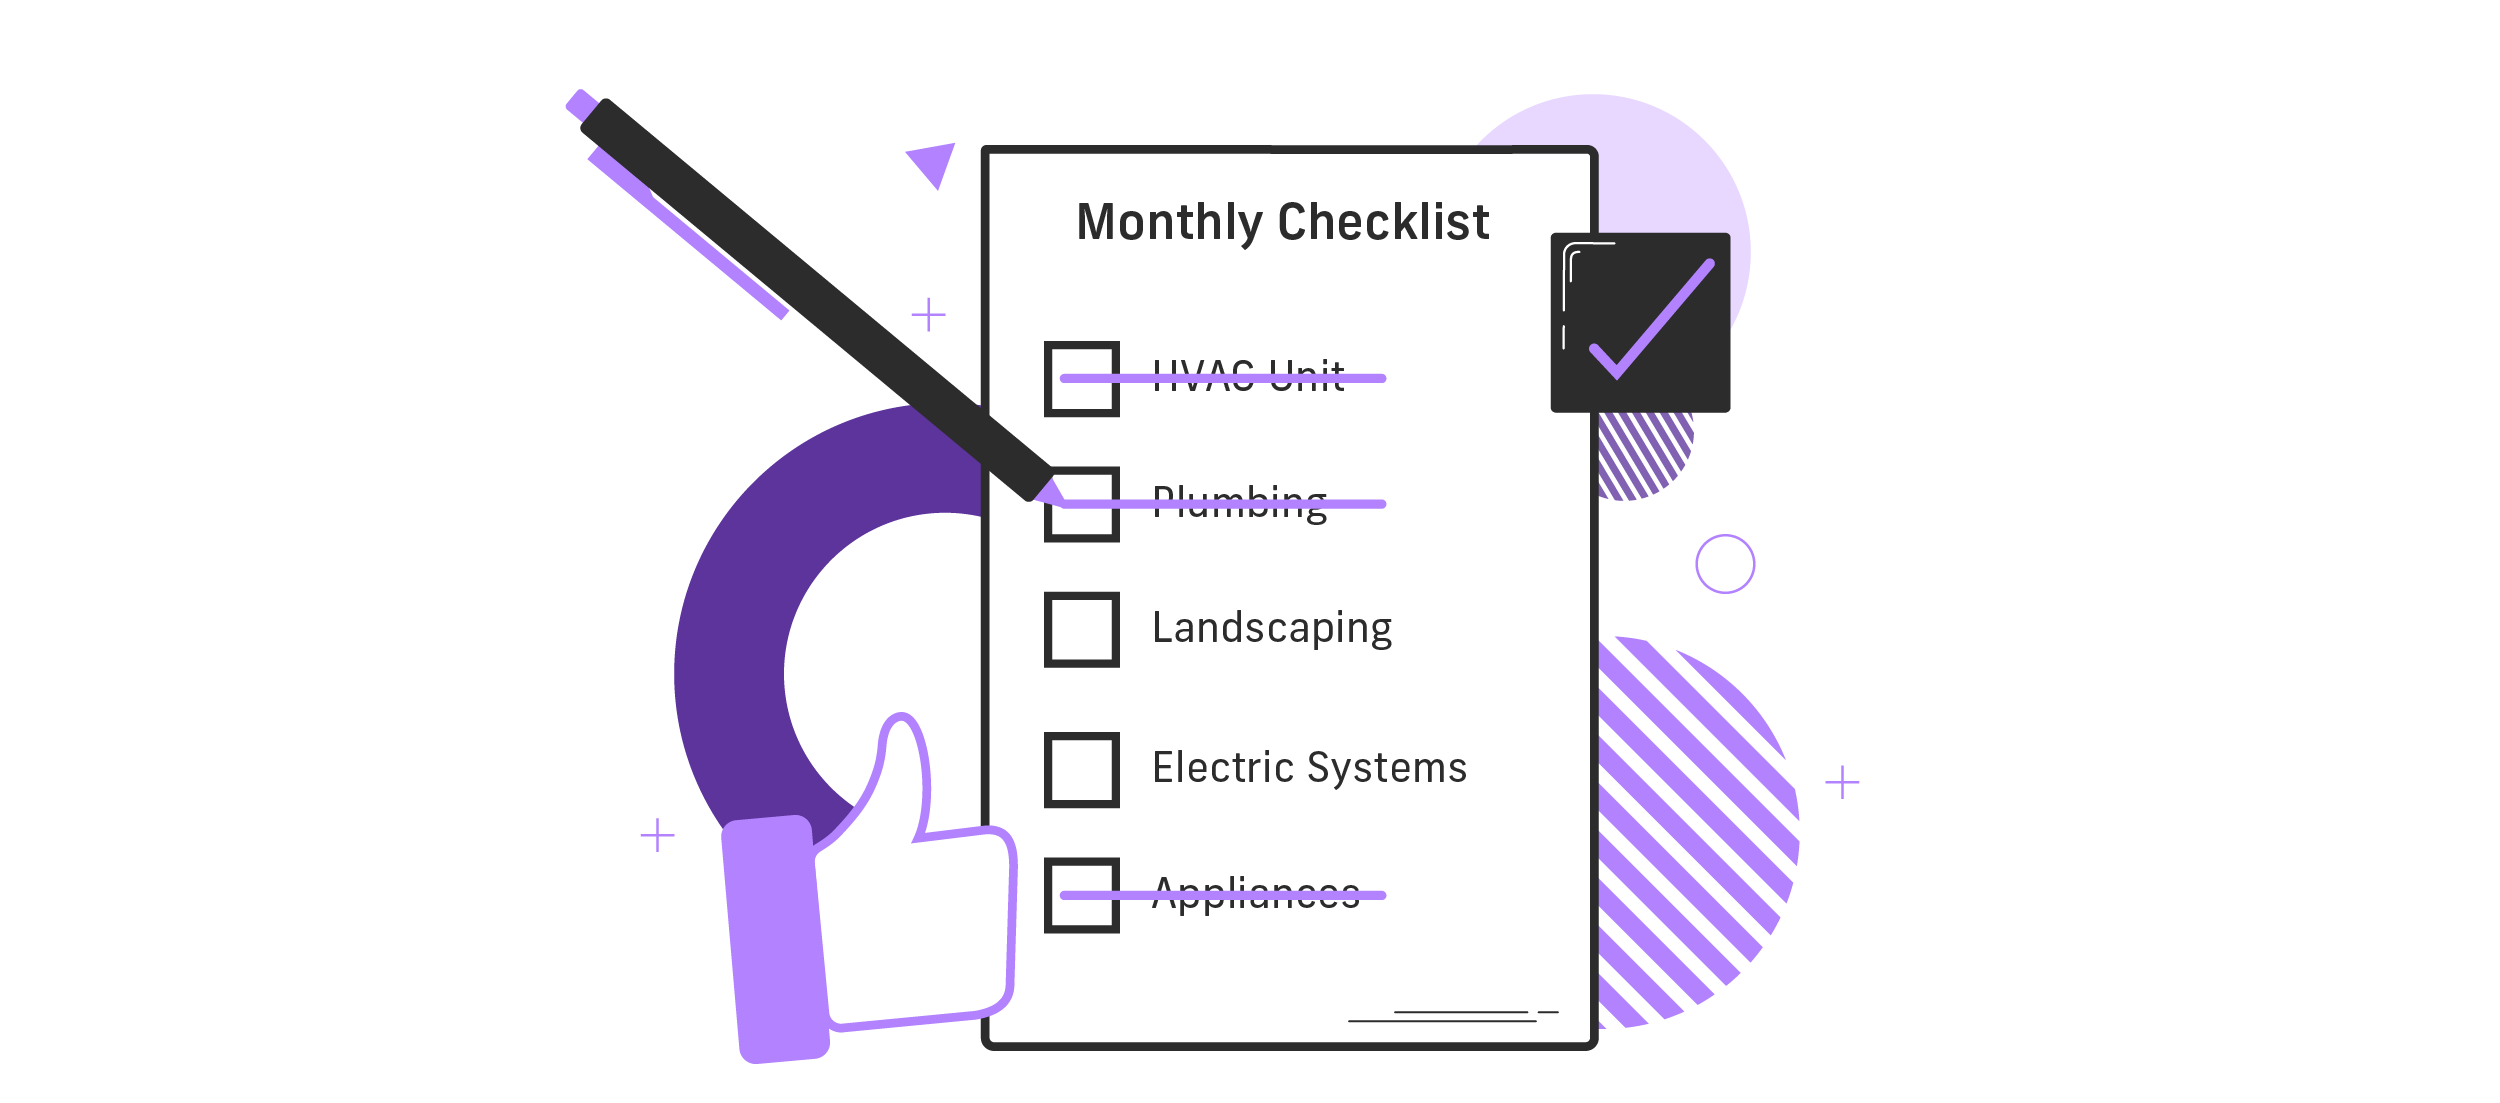 An illustration of a monthly apartment maintenance checklist.